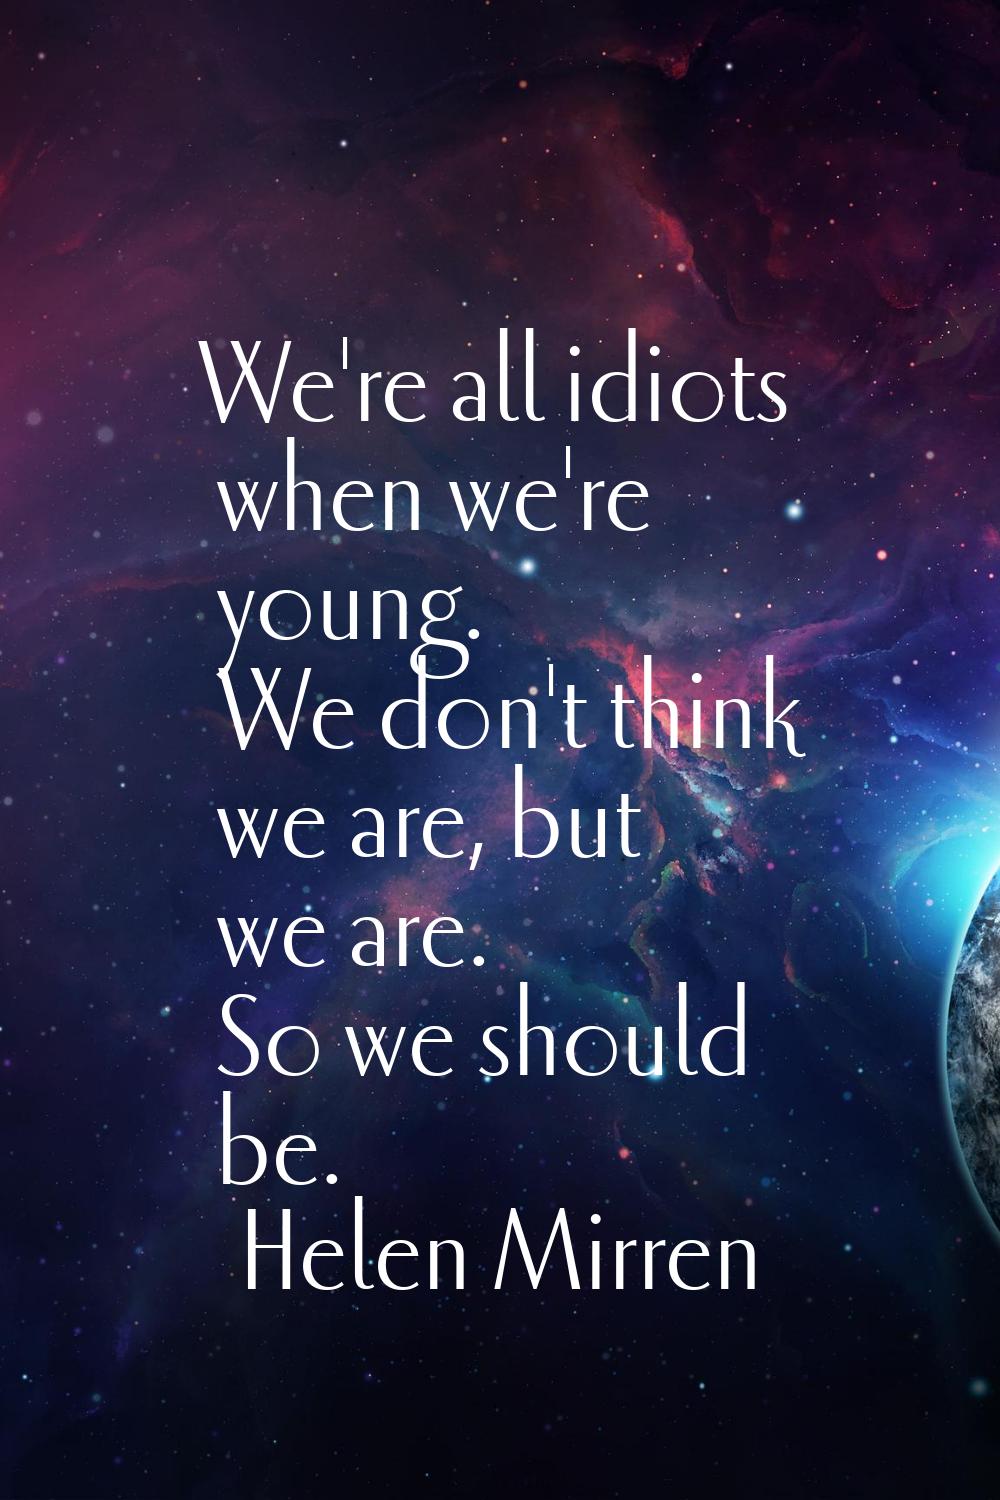 We're all idiots when we're young. We don't think we are, but we are. So we should be.